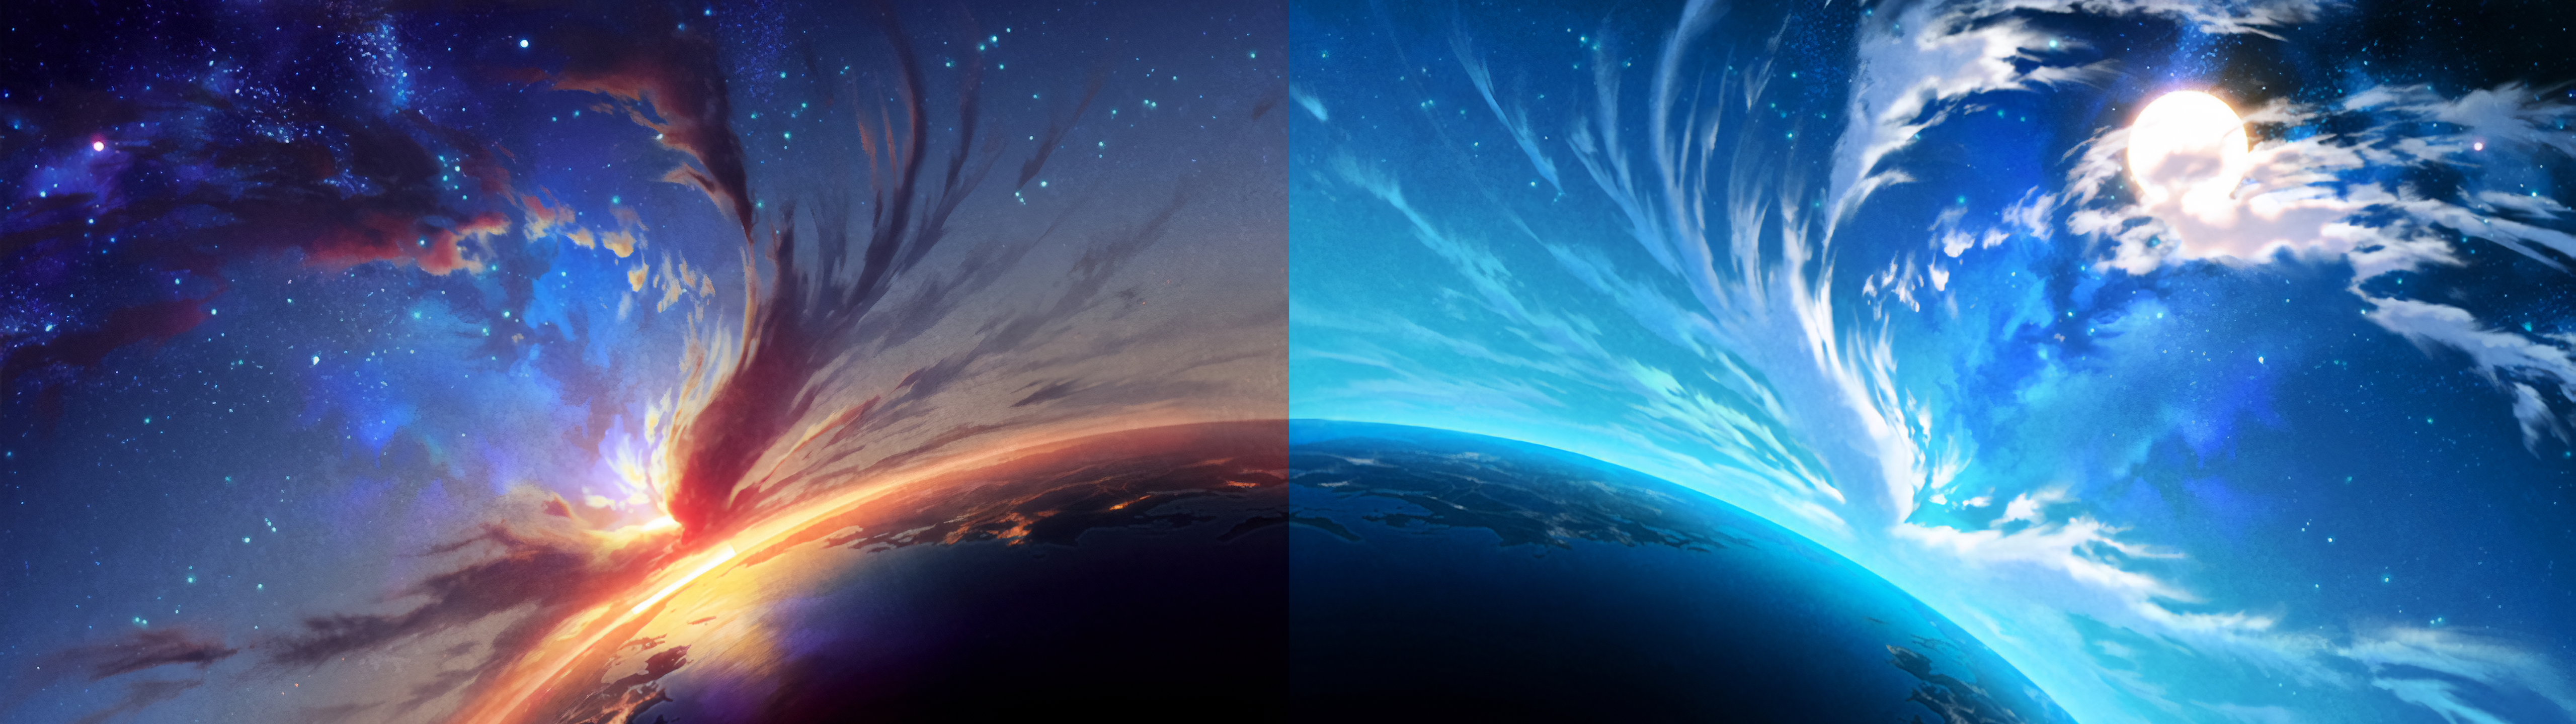 Dual Monitor Wallpapers 5120x1440 posted by Ethan Anderson